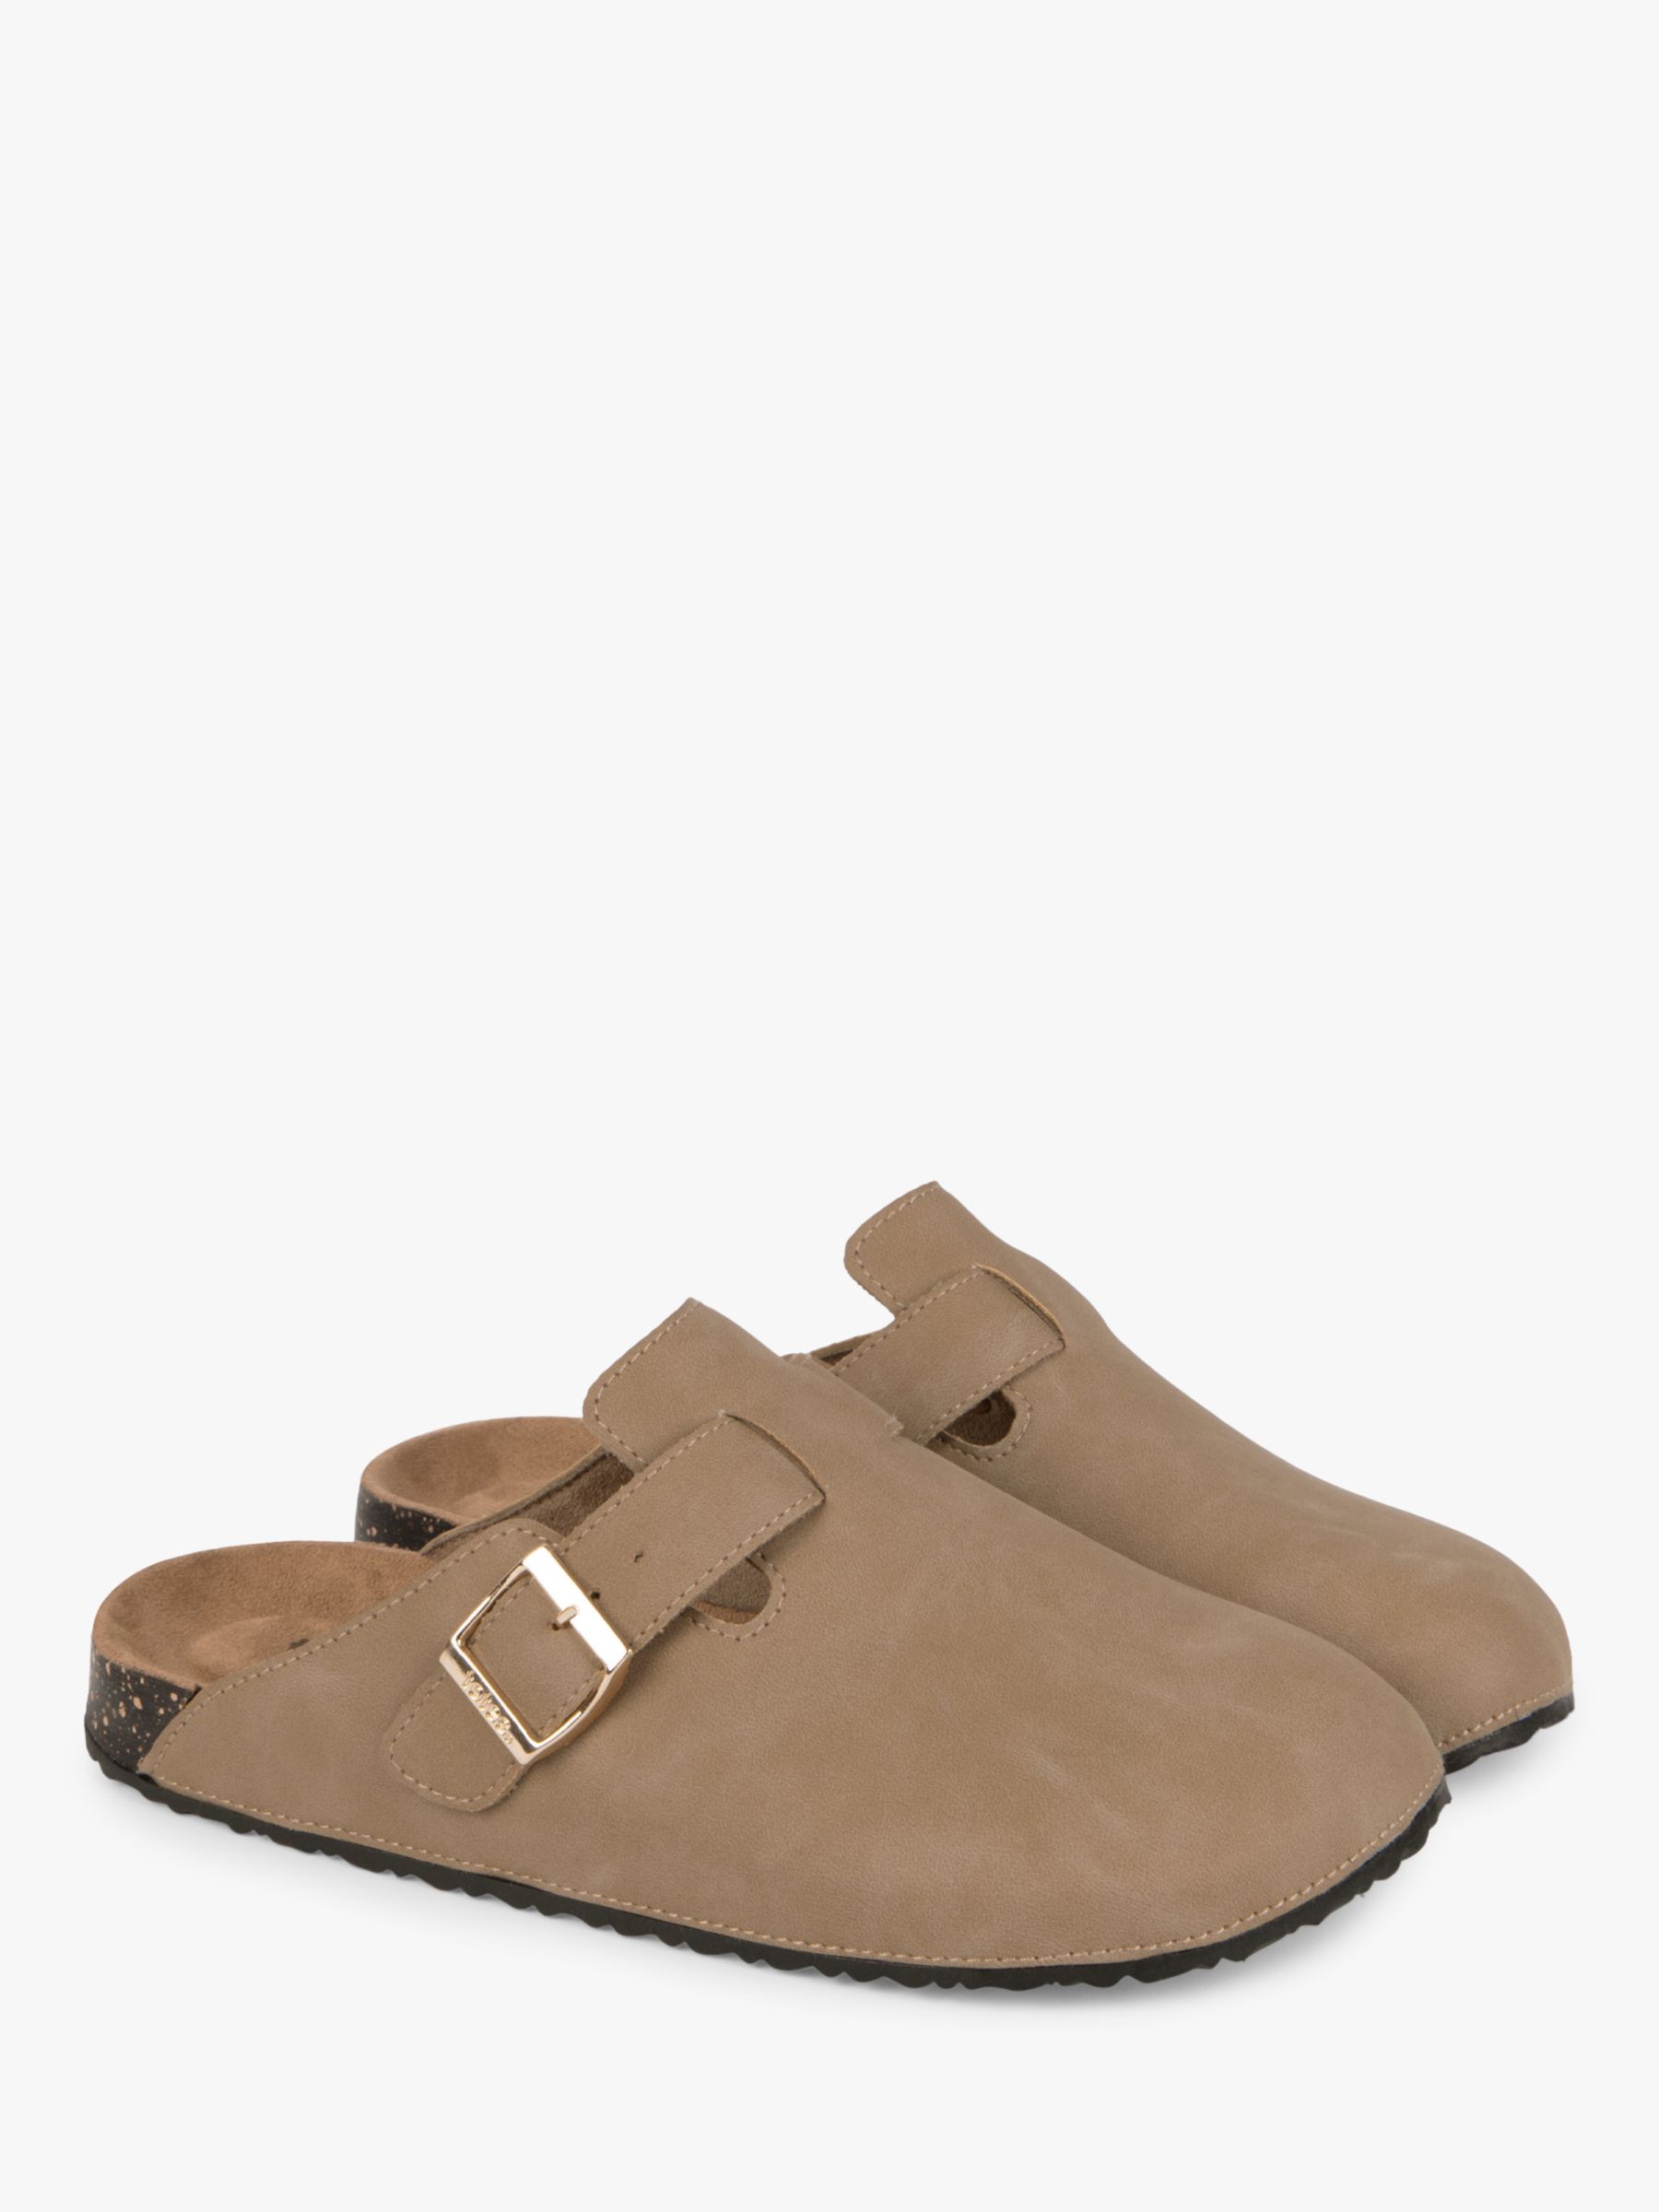 Buy totes Buckle Clogs, Taupe Online at johnlewis.com